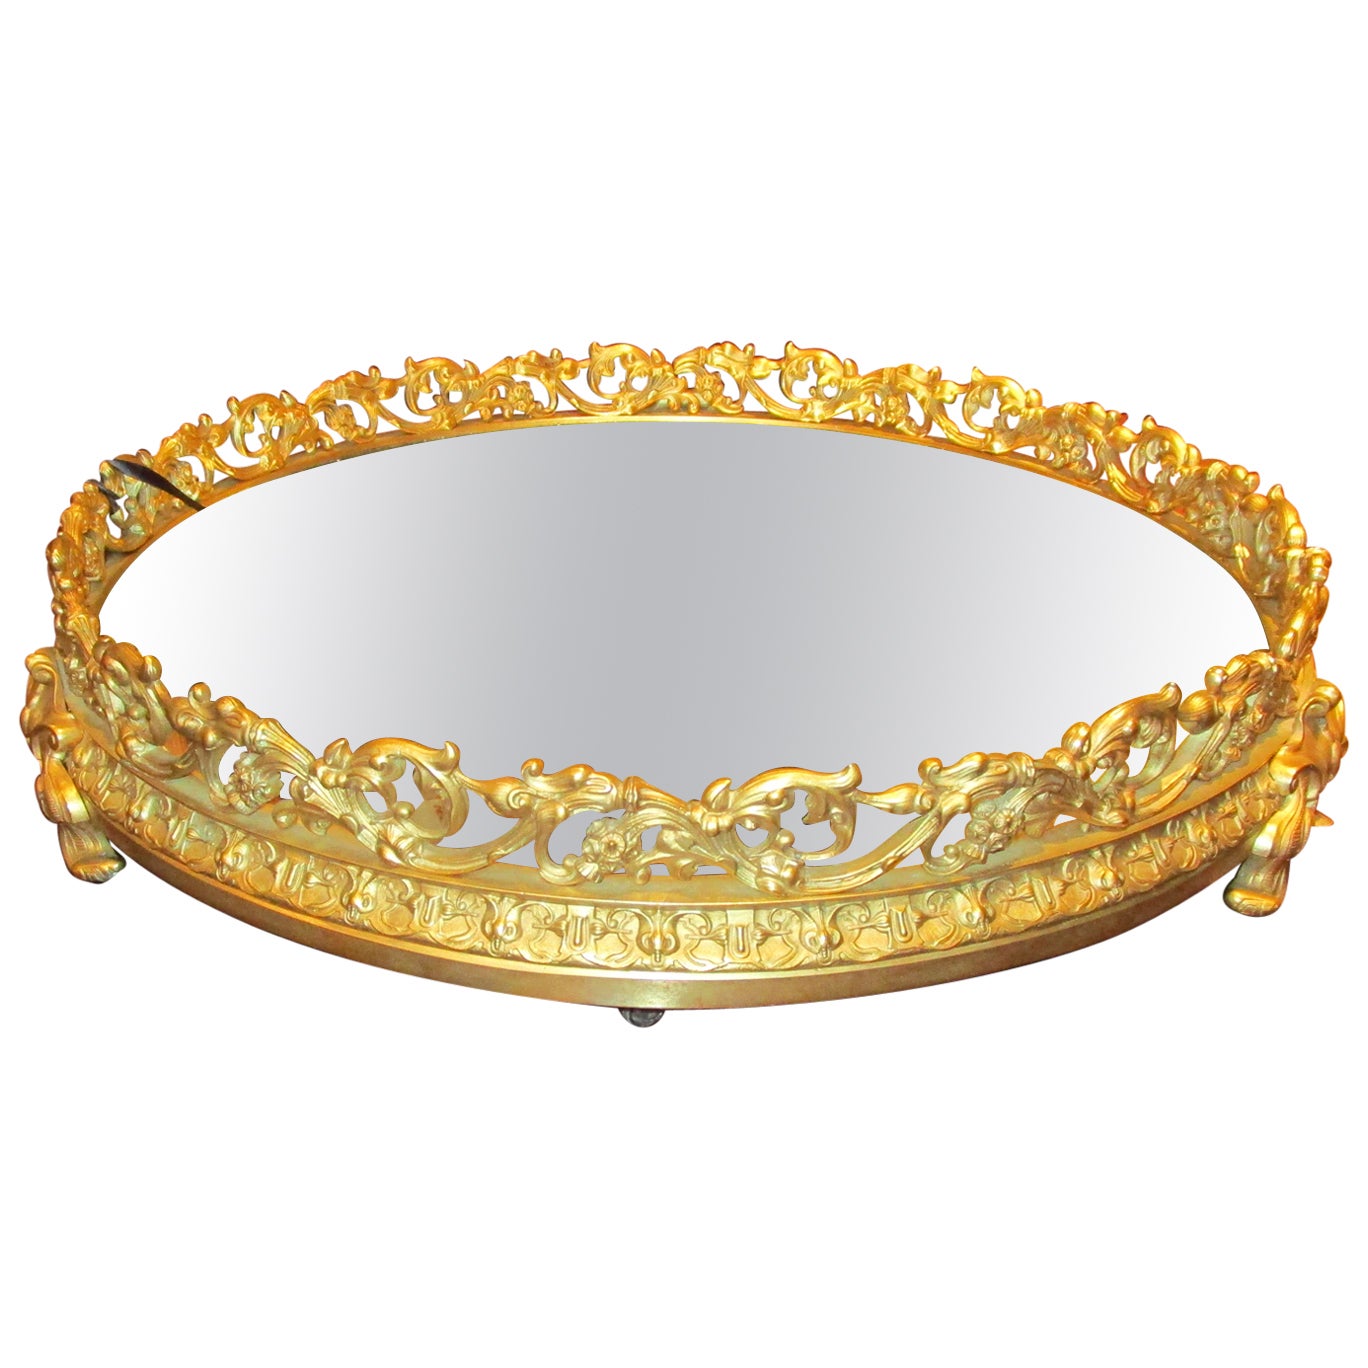 A fine 19th century French gilt bronze mirrored plateau  For Sale